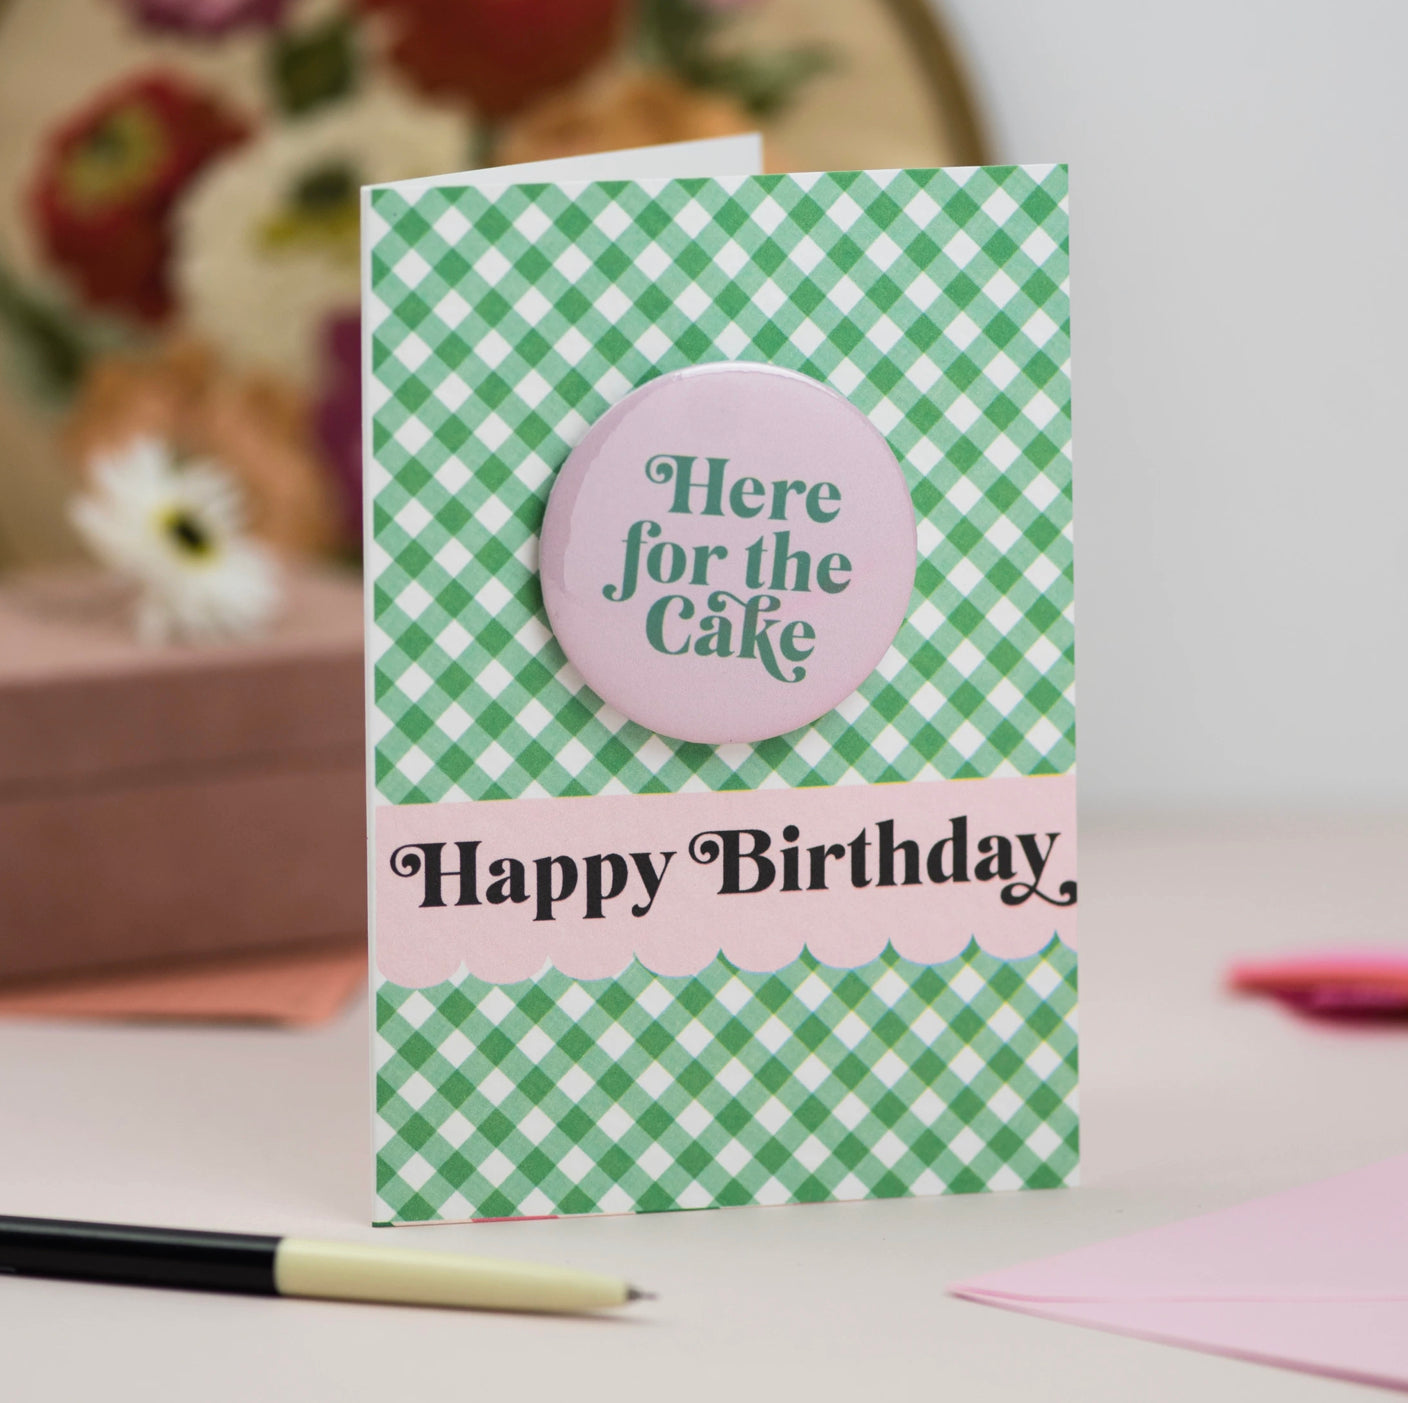 "Here for the Cake" Badge Card